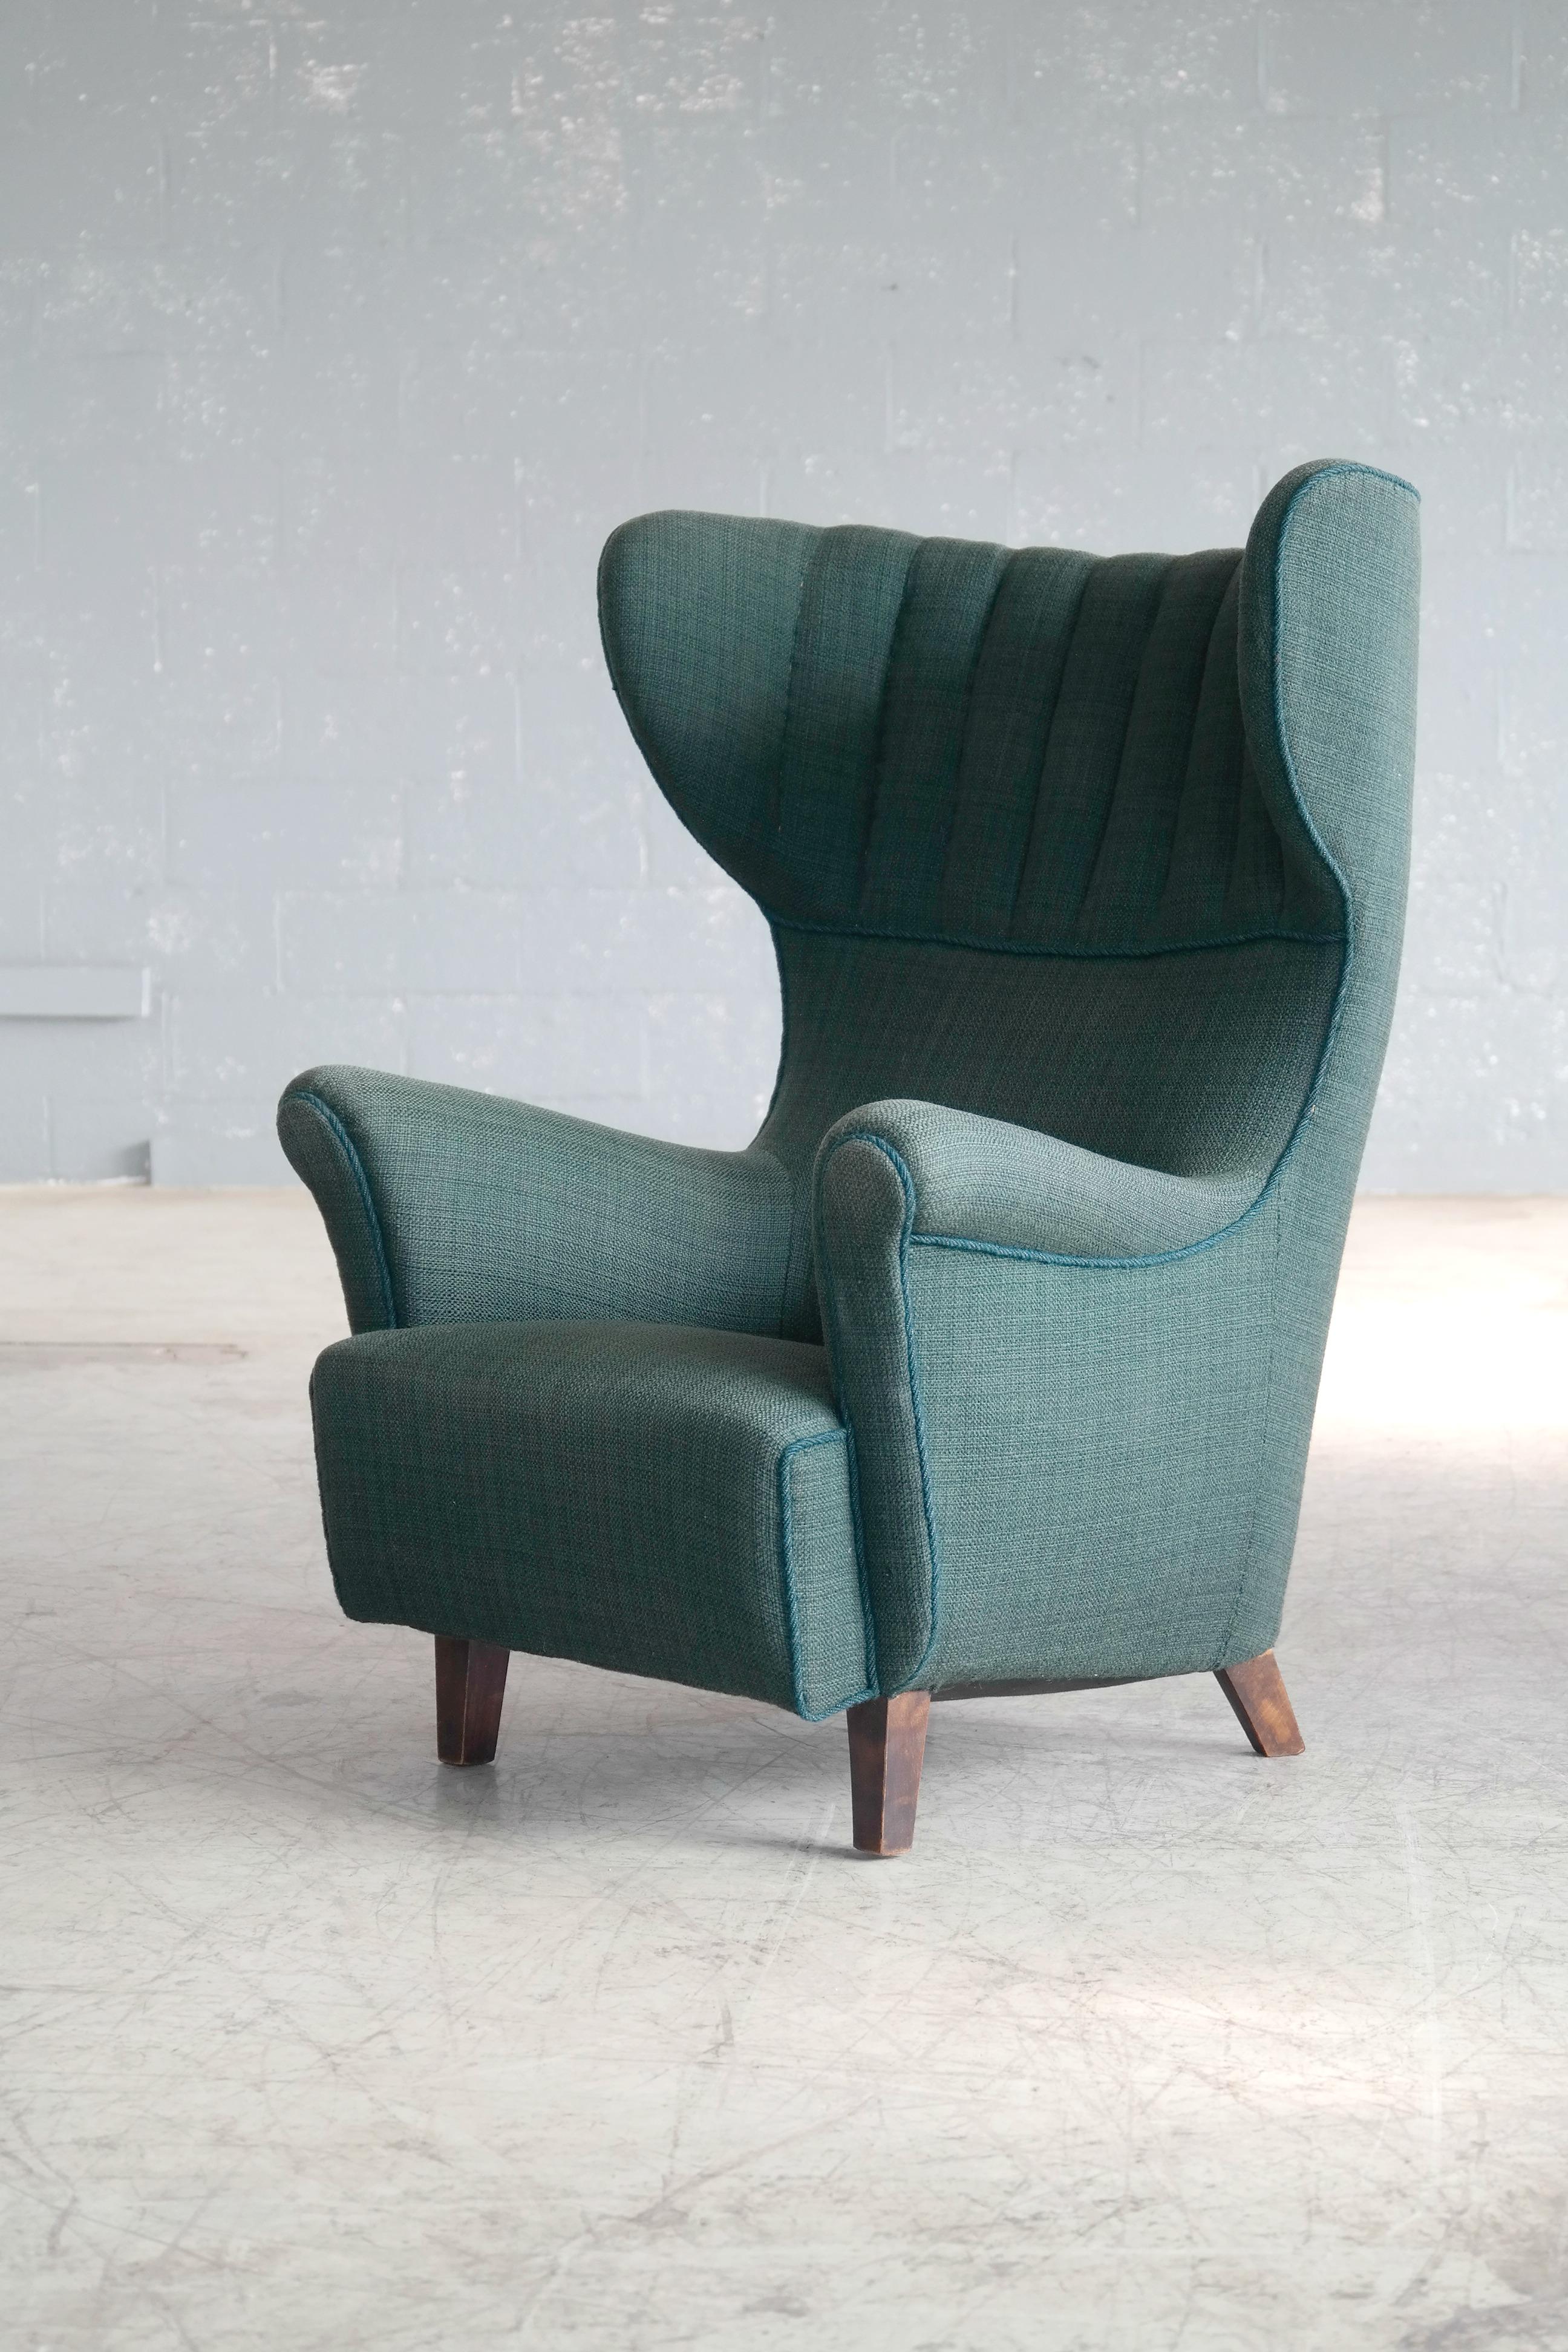 Mid-20th Century Danish 1950s Classic Flemming Lassen Style High Wing Back Lounge Chair